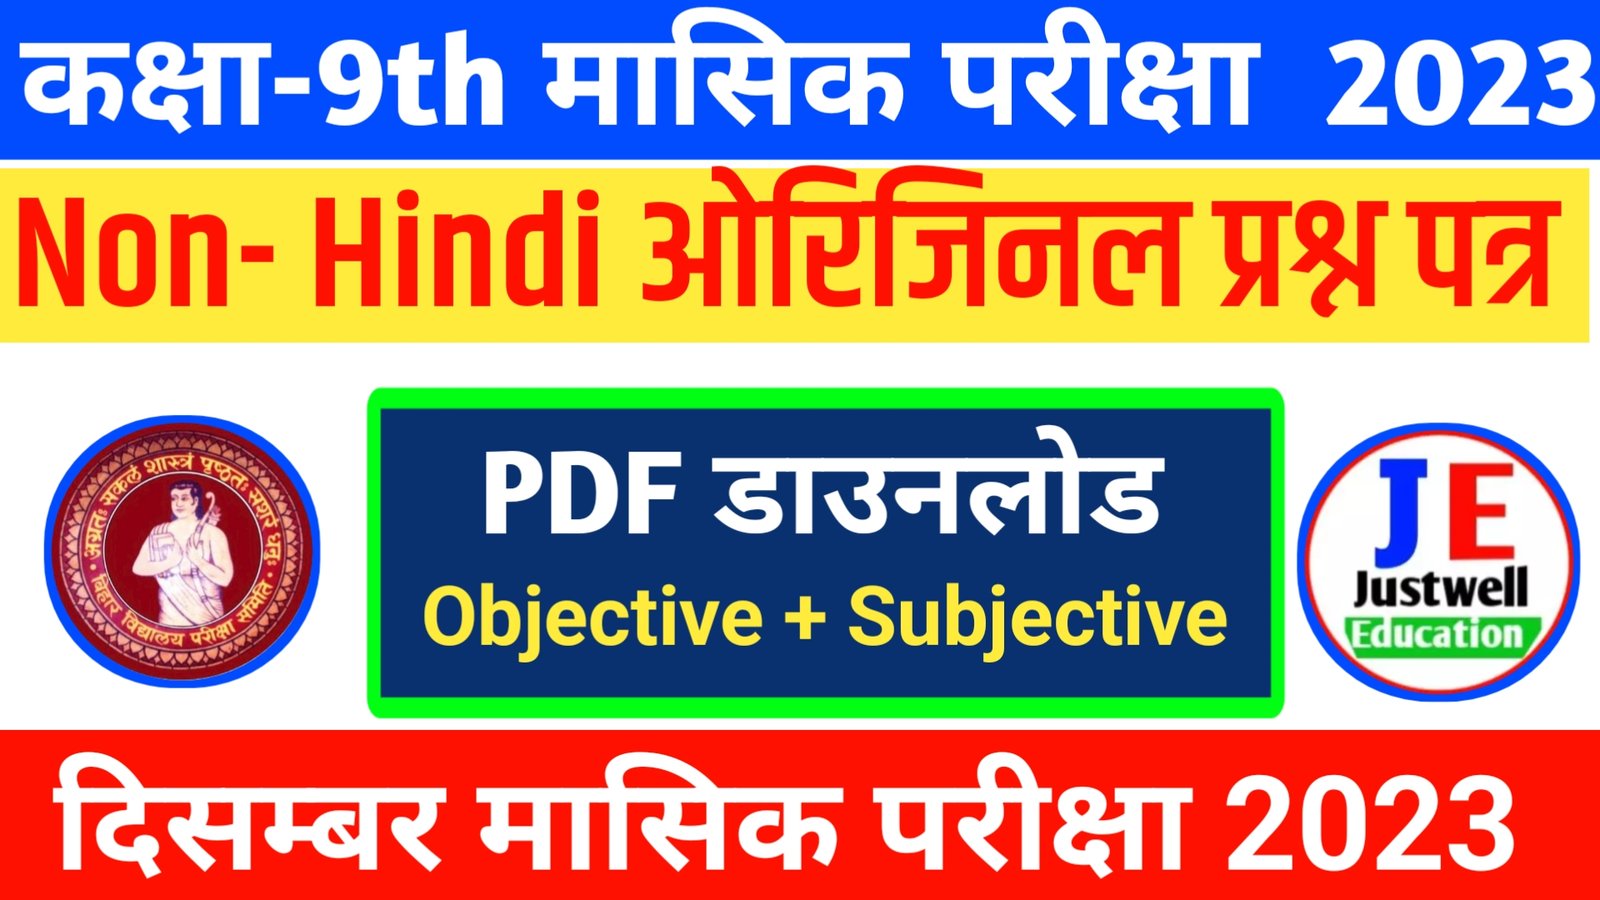 Class 9th Non Hindi December monthly exam